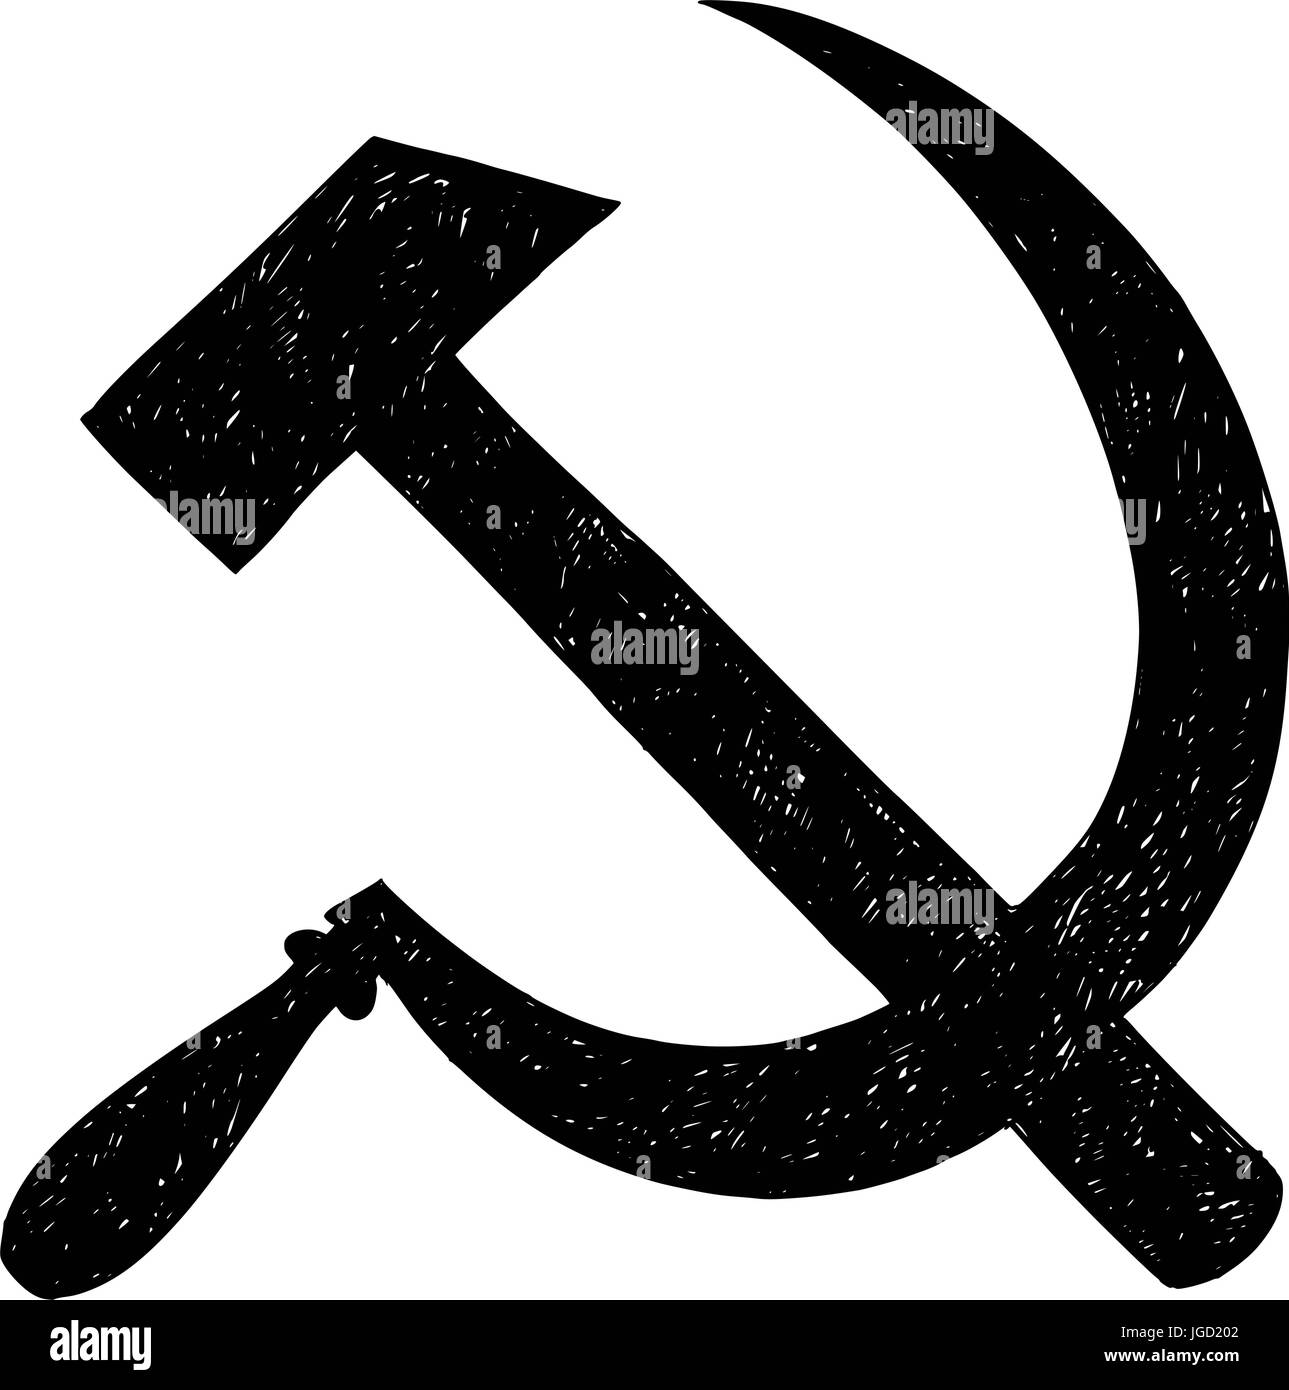 Hammer And Sickle Badge High Resolution Stock Photography and Images - Alamy